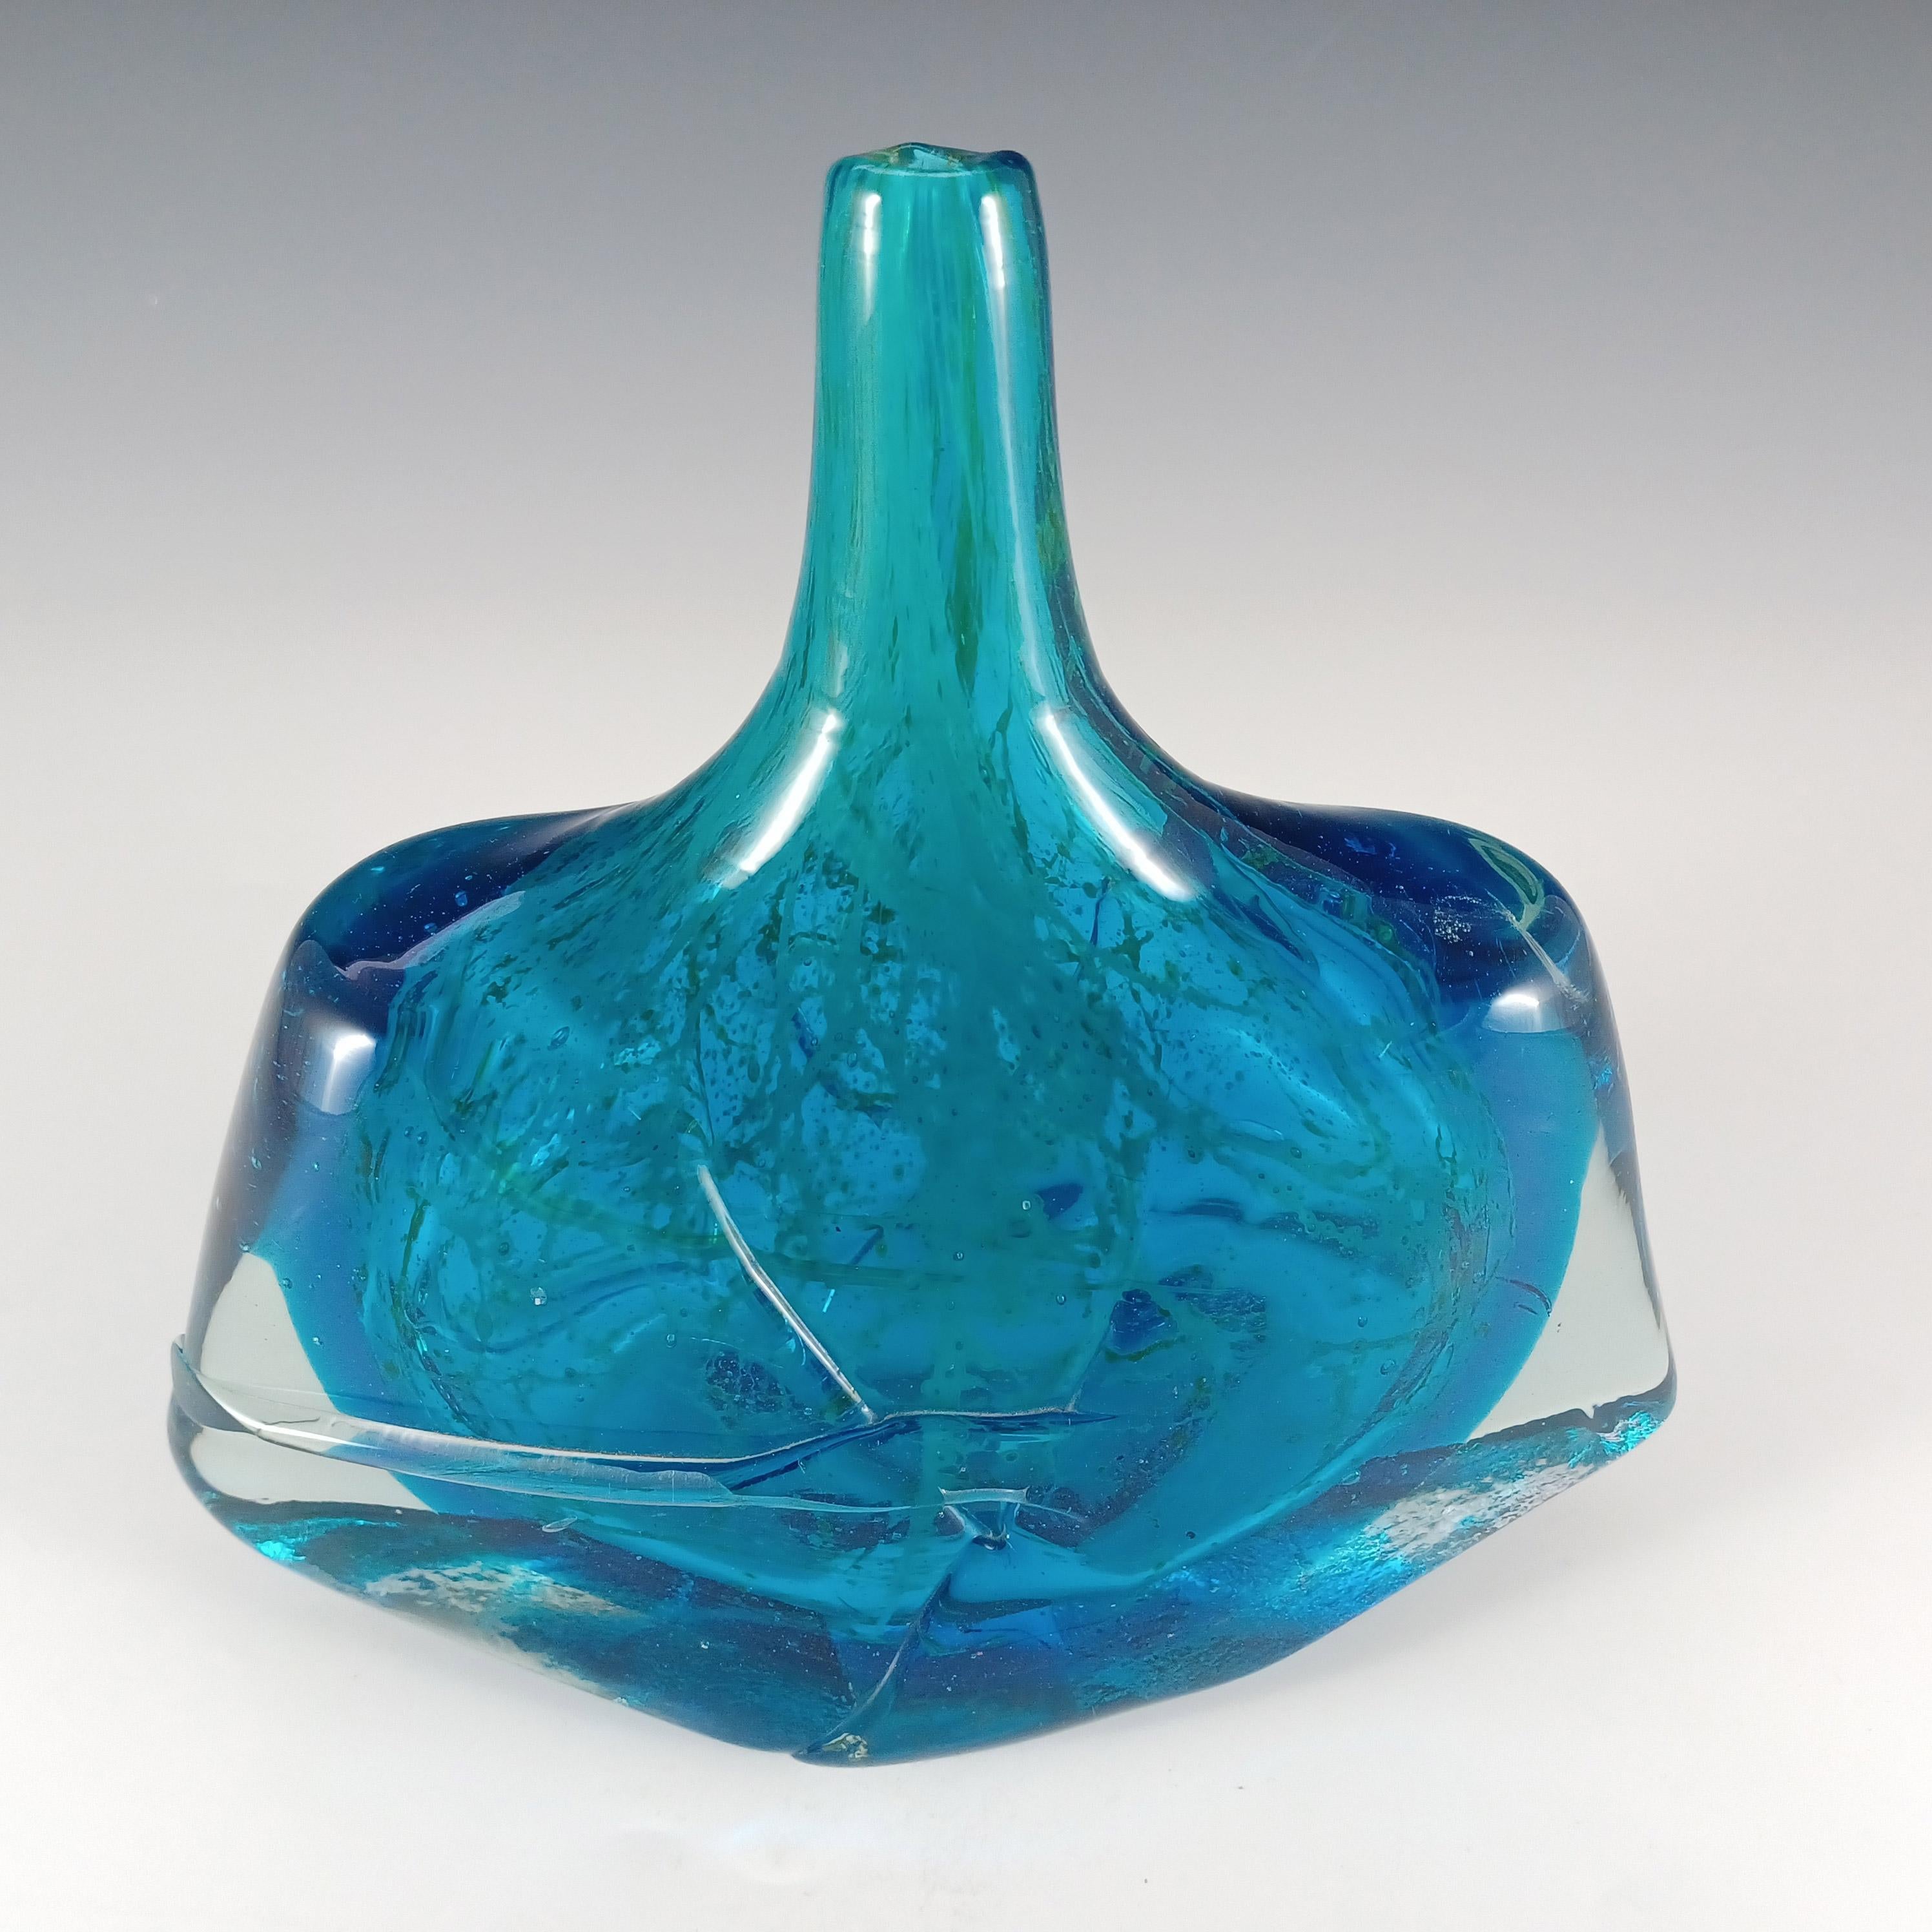 Hand-Crafted Mdina Maltese Blue Glass 'Fish' / 'Axe Head' Vase - Signed 1979 For Sale